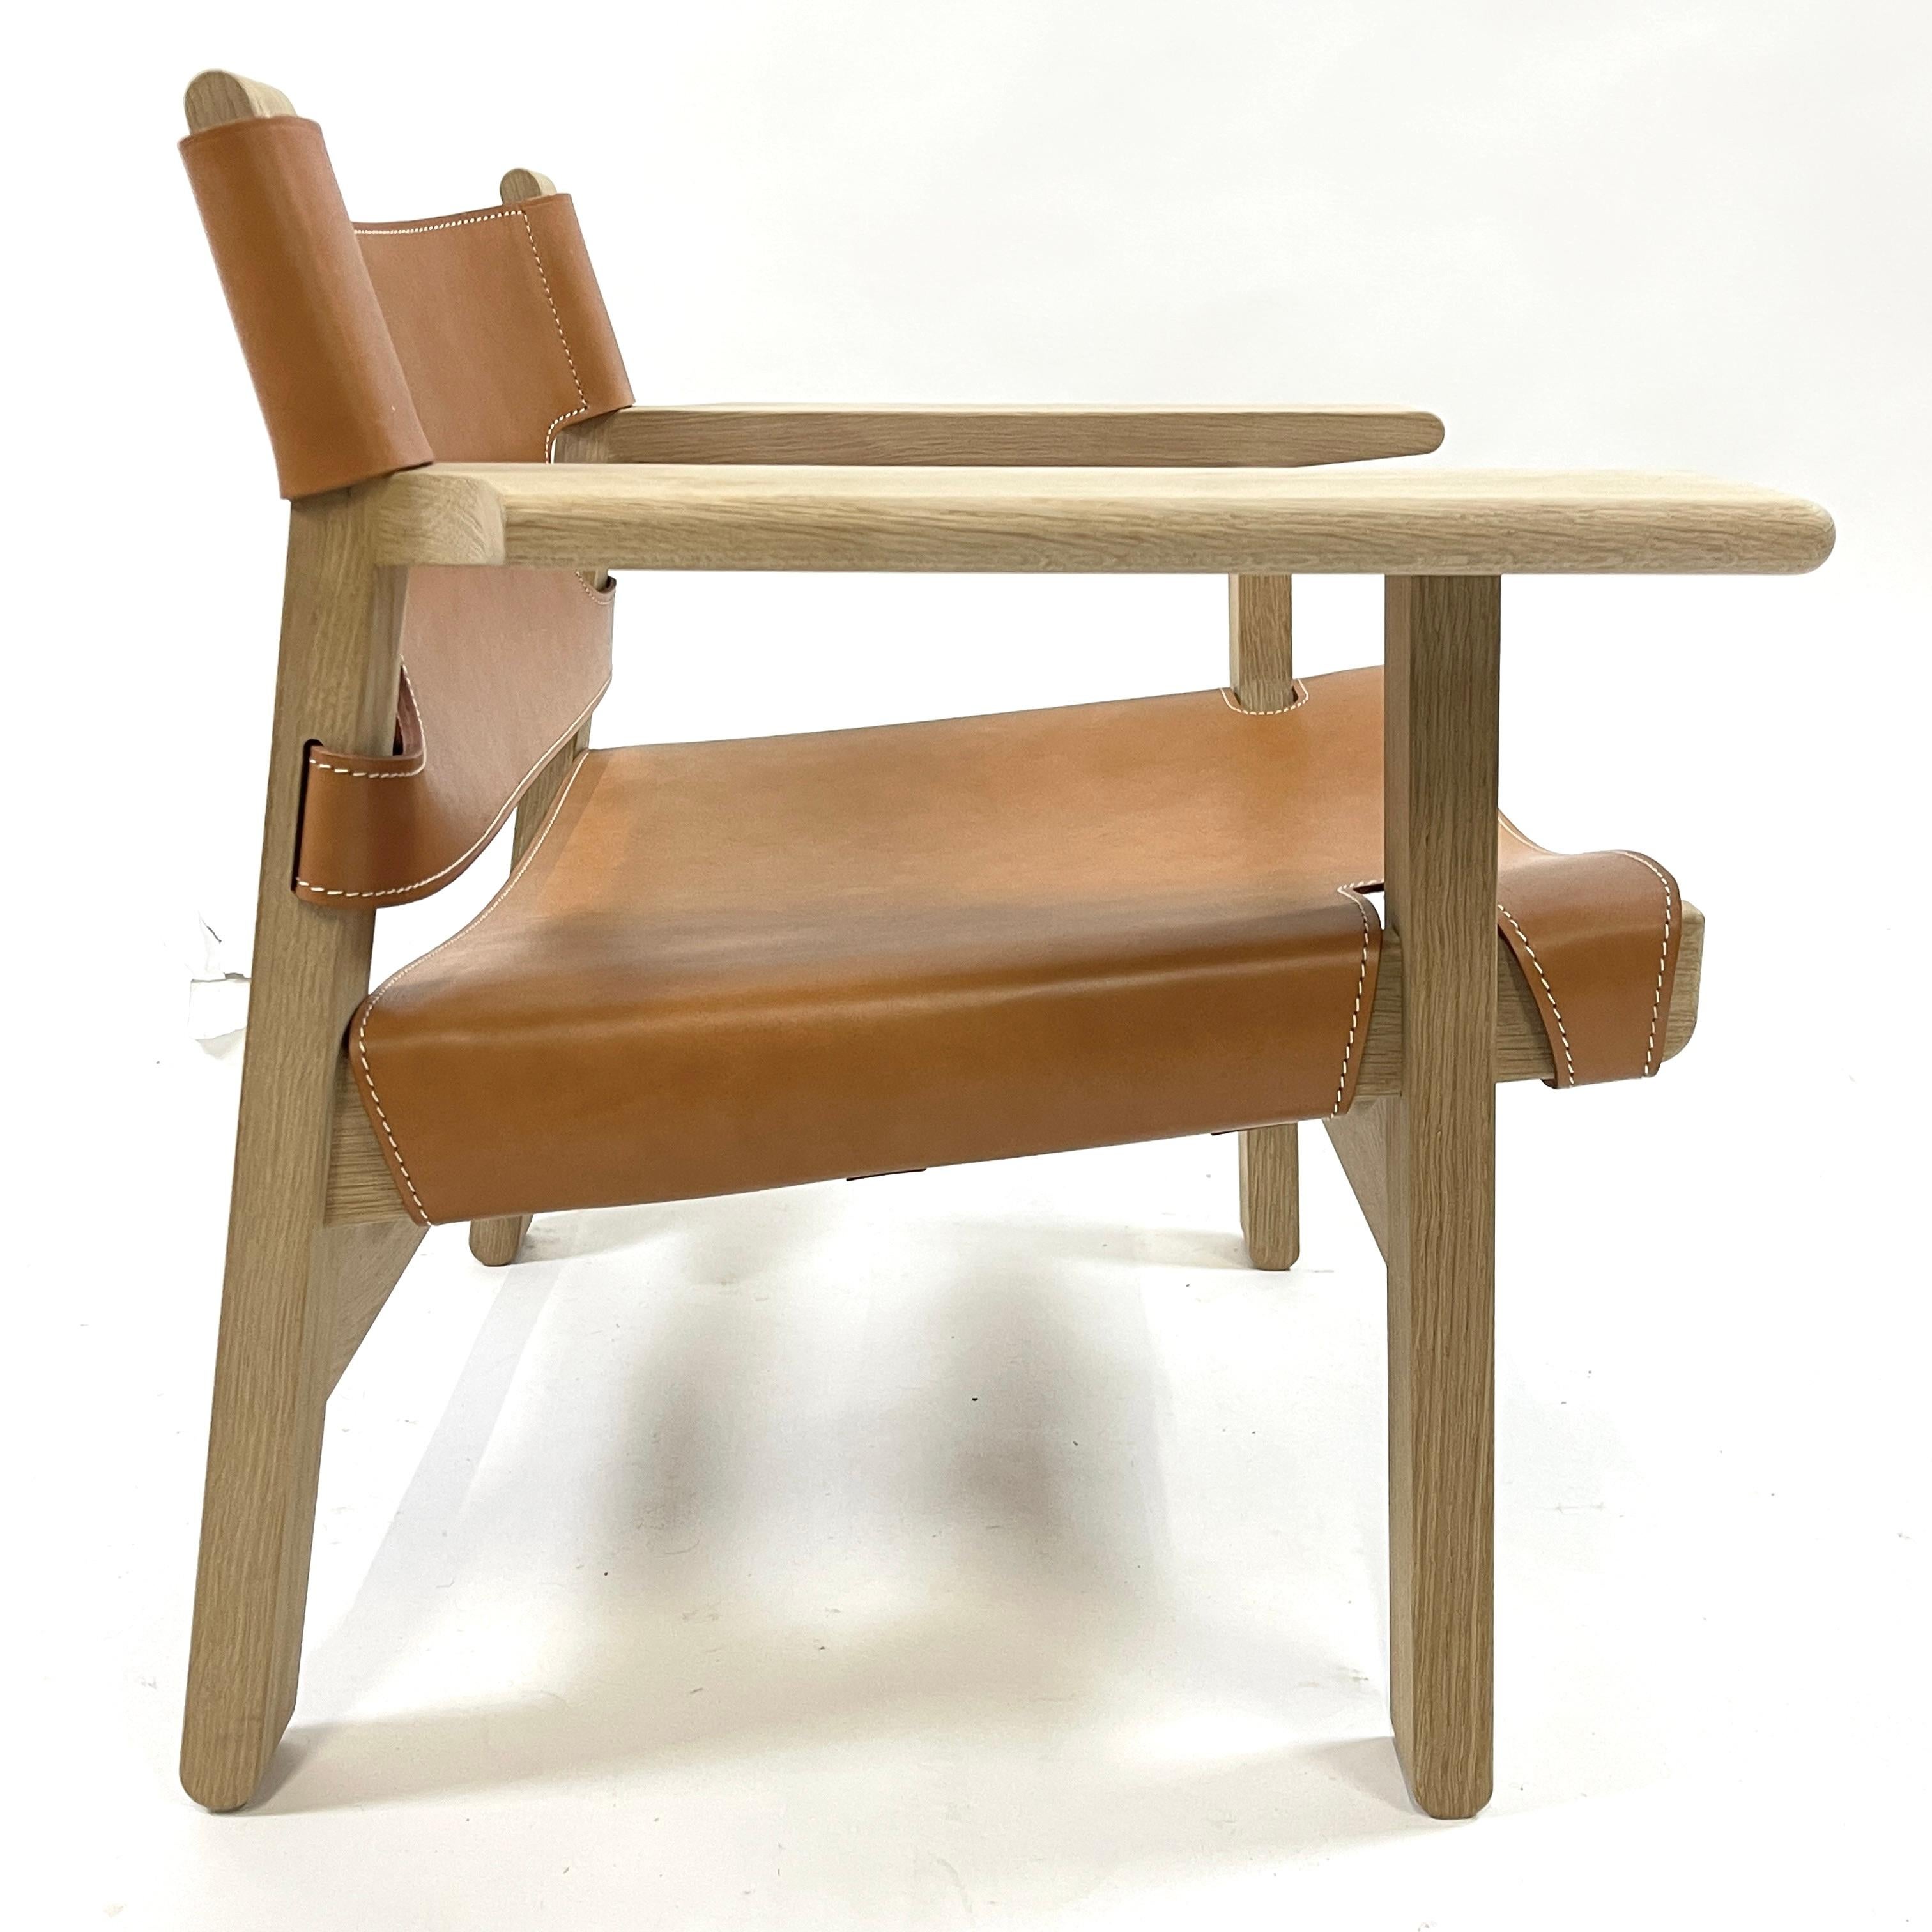 Excellent Børge Mogensen Oak & Saddle Leather 1958 Spanish Chair for Frederica  In Excellent Condition For Sale In Hudson, NY